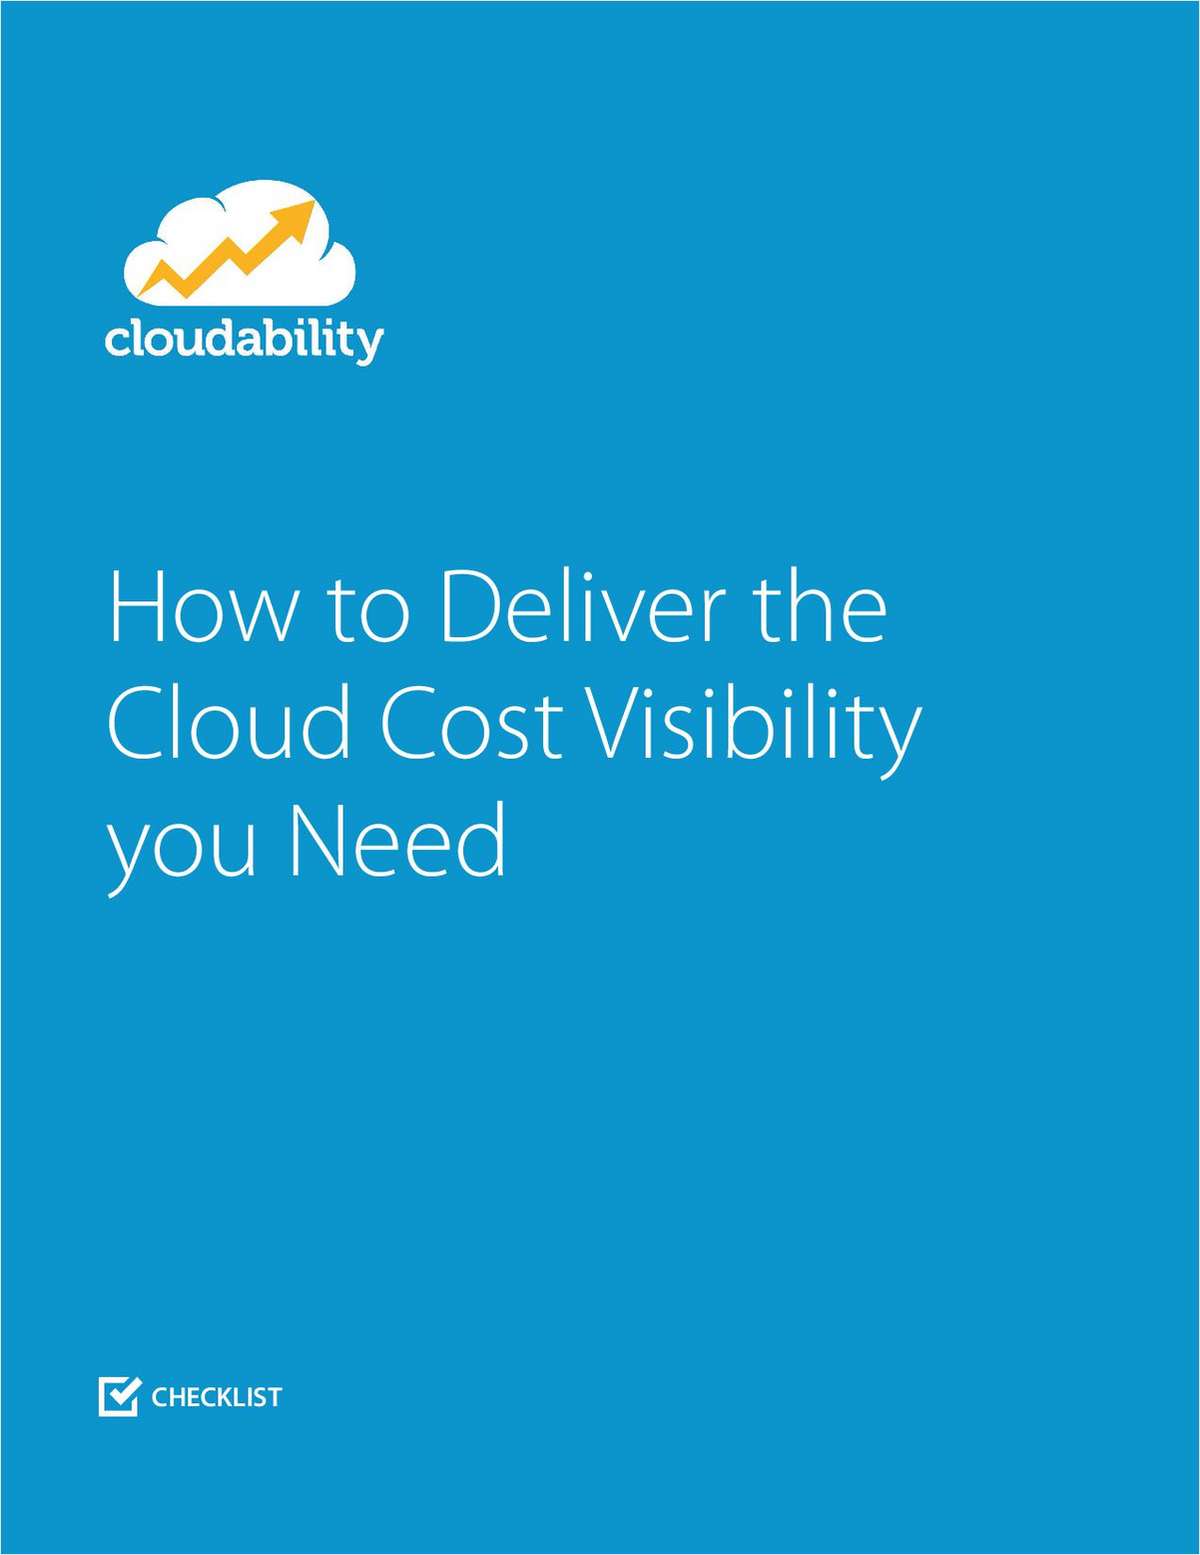 How to Deliver the Cloud Cost Visibility You Need